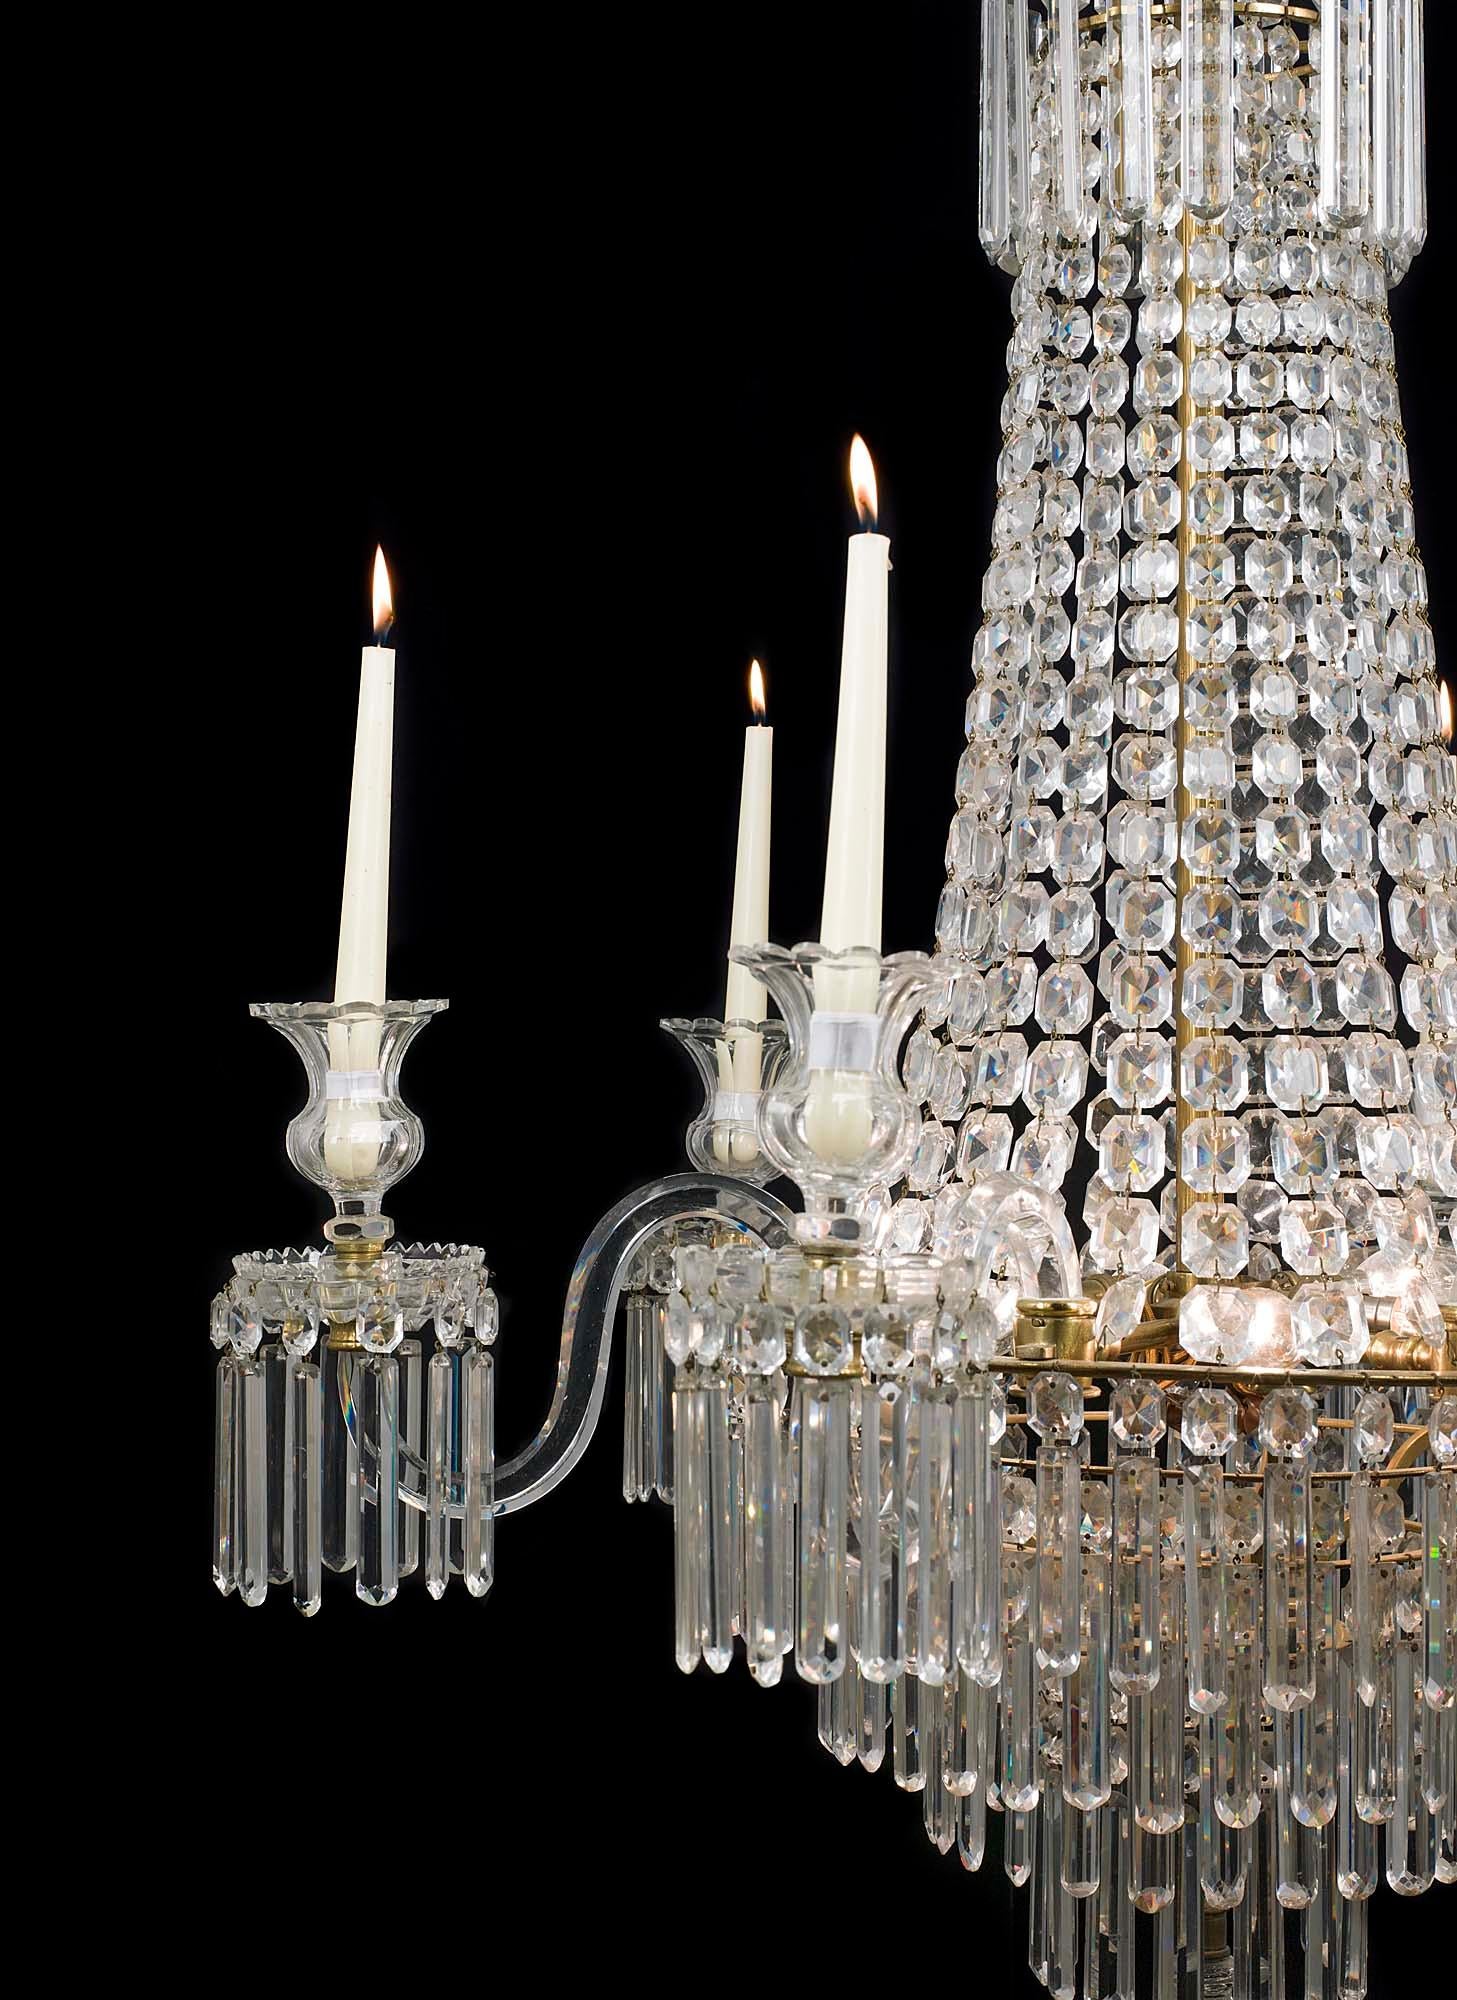 A very fine English Regency six branch crystal waterfall chandelier the four tiers profusely hung with pendant and bead drops, each solid arm with vase shaped candle holders and hung with further bead and pendant drops.
English, 19th Century.

Note: